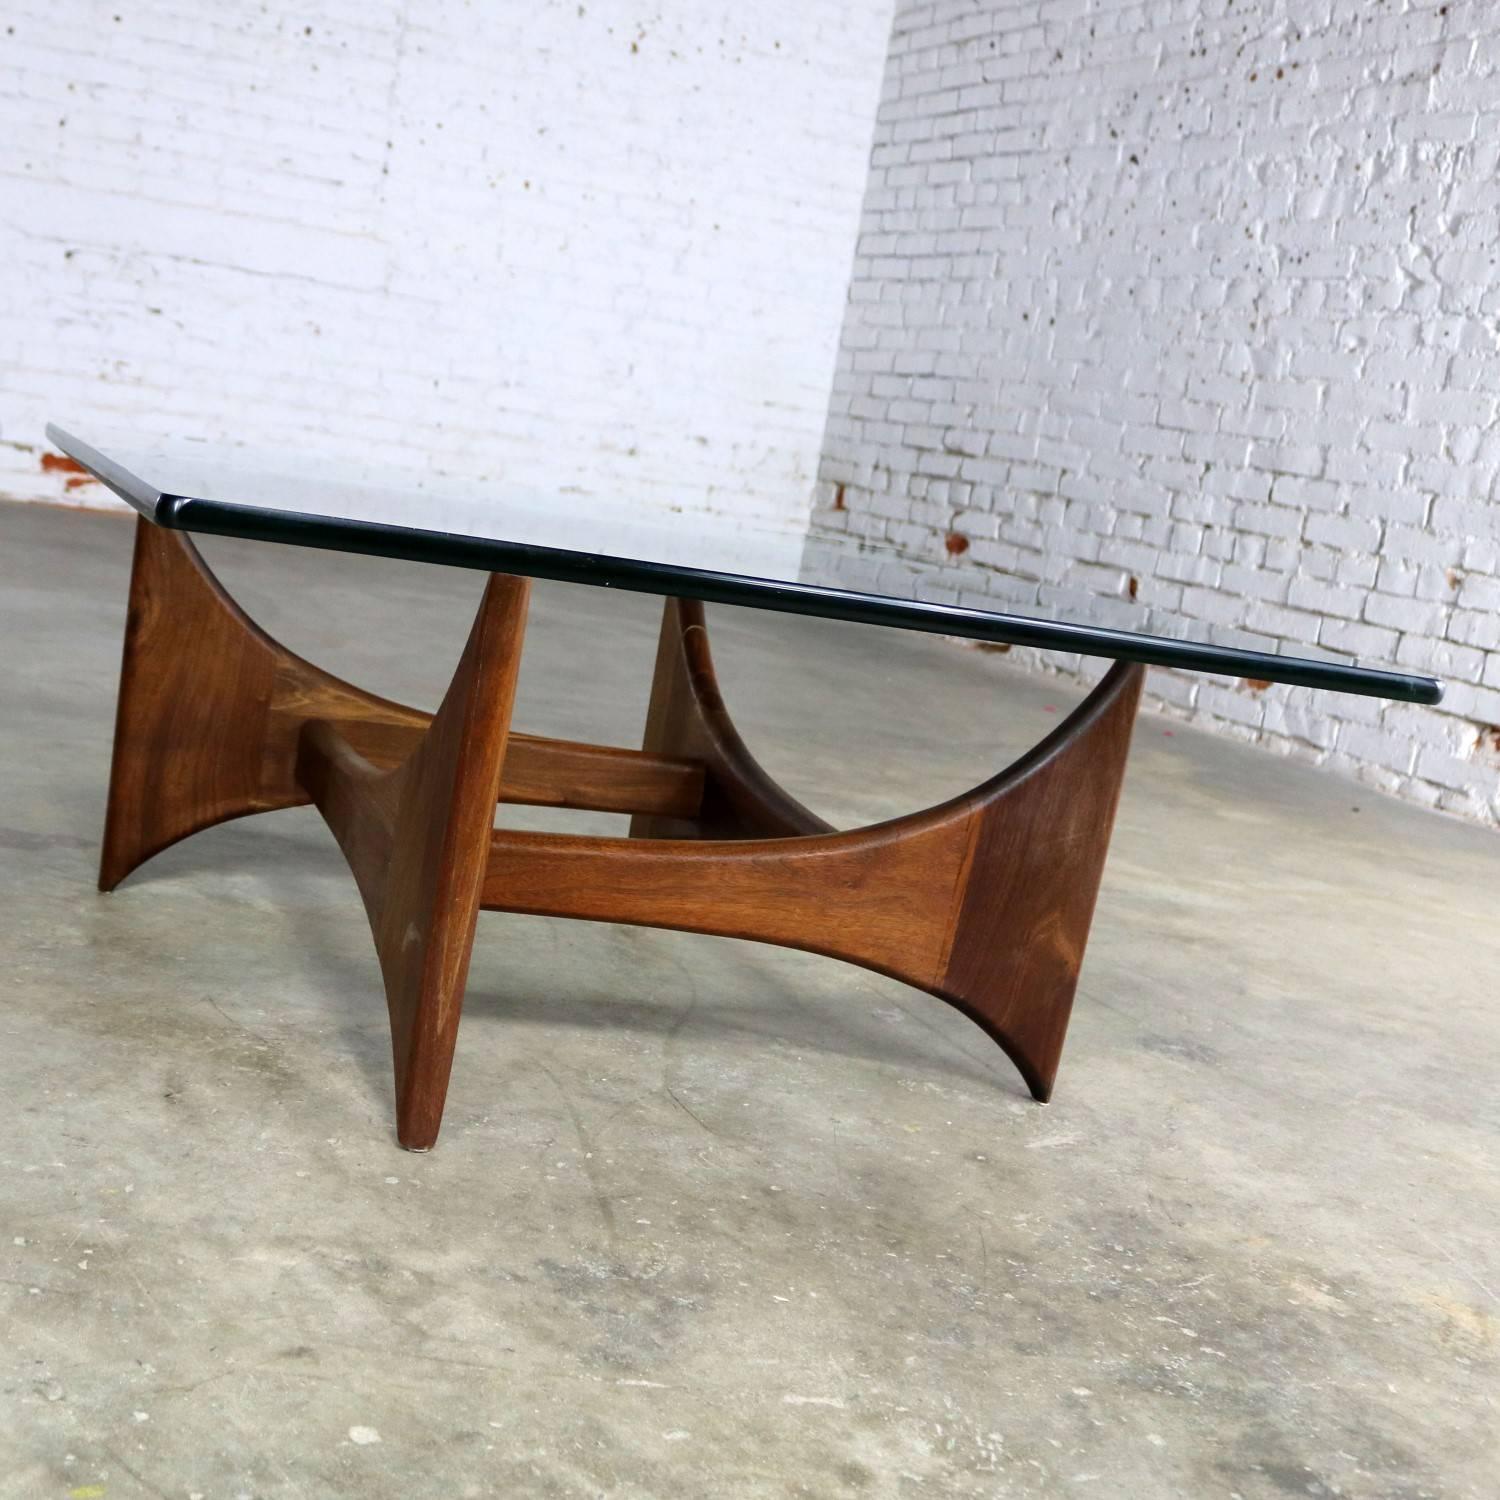 20th Century Adrian Pearsall Walnut and Glass Sculptural Cocktail Table for Craft Associates